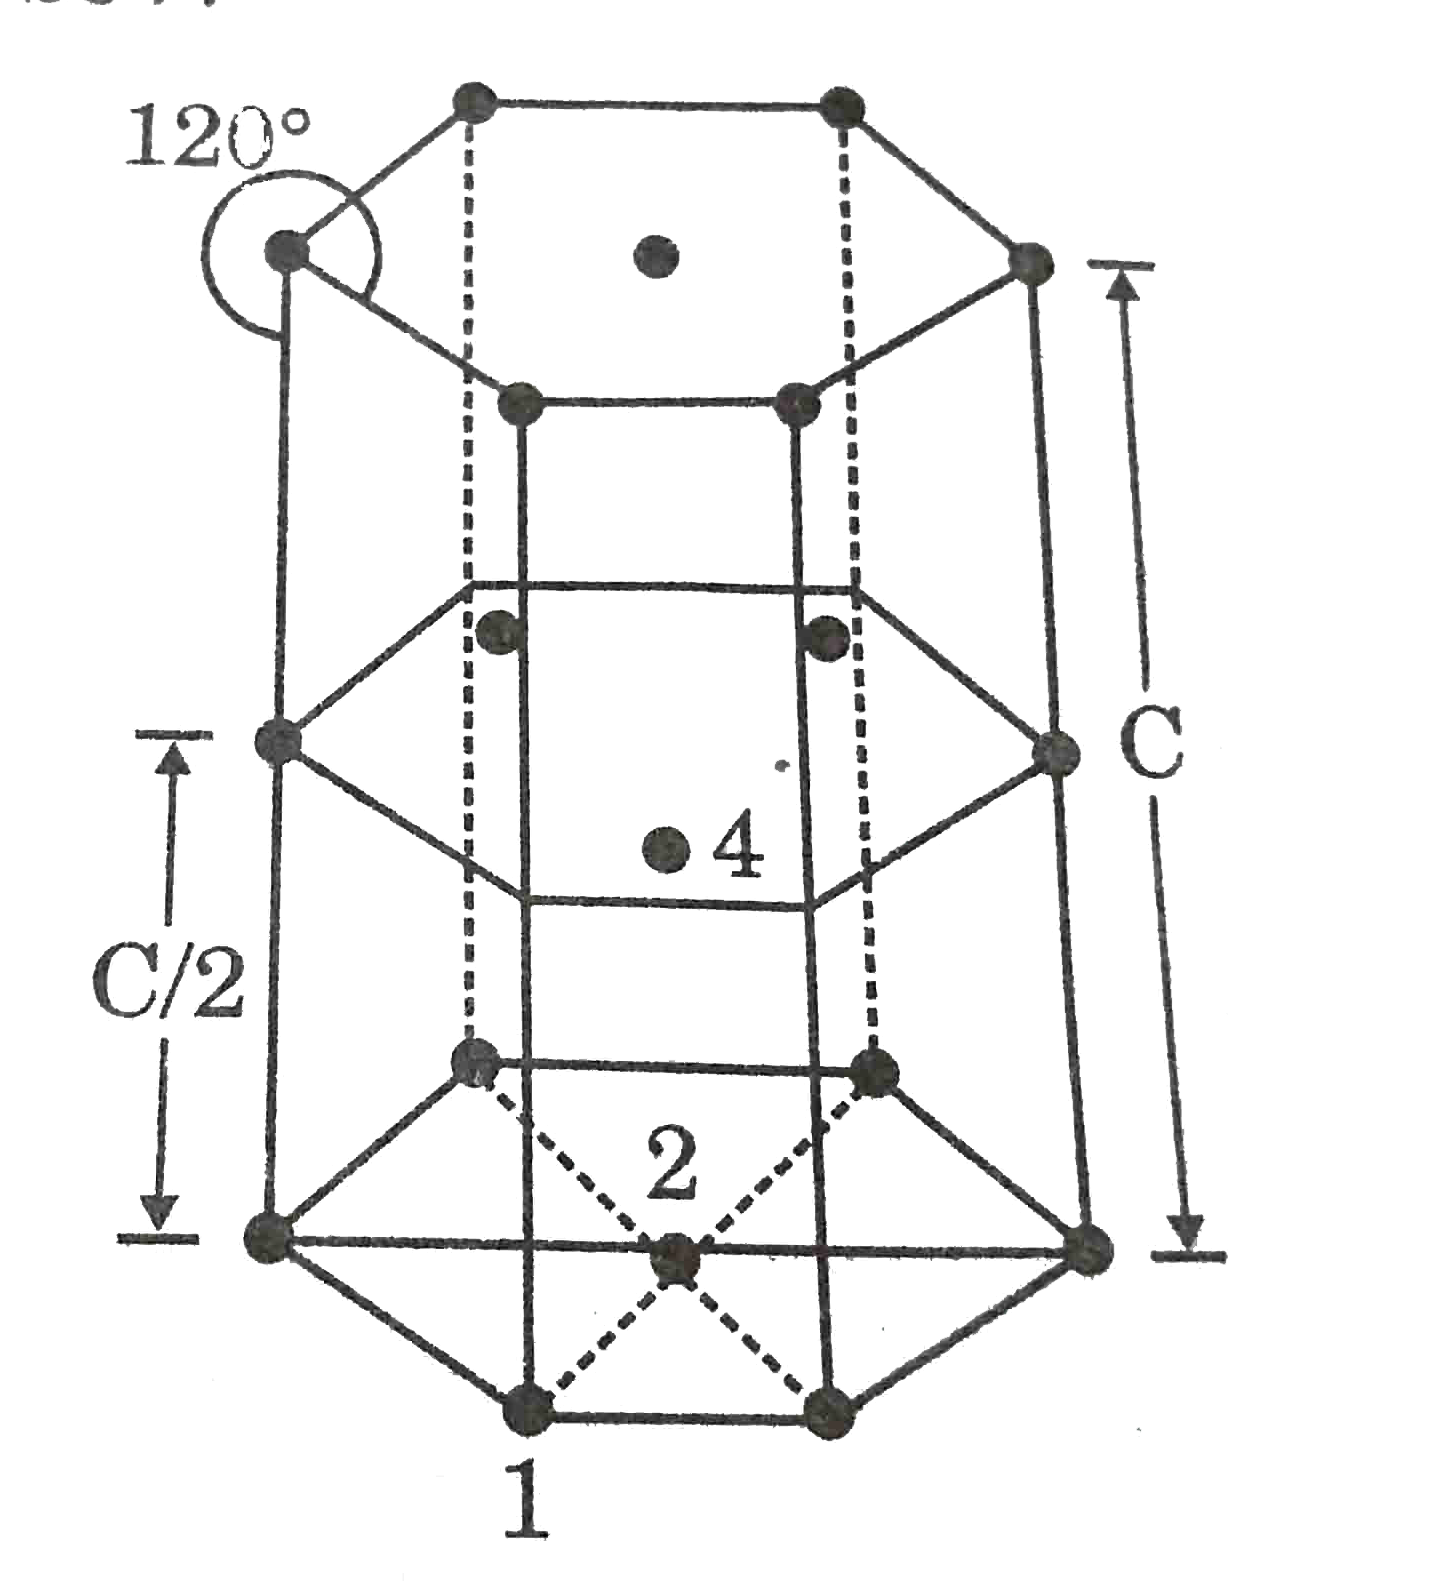 In hexagonal system of crystals, a frequently encountered arrangement of atoms is described as a hexagonal prism. Here, the top and bottom of the cell are regular hexagons and three atoms are sandwiched in between them. A space -filling model of this structure, called hexagonal close-packed (HCP), is consituted of a sphere on a flat surface surrouneded in the same plane by six identical spheres as closely possible. Three sphere are then palces over the first layer so that they touch each other and represent second layer is covered with third layer that is identical to the bottom layer in relative position. Assume radius of enery sphere to be r.      The number of atoms in the HPC unit cell is :